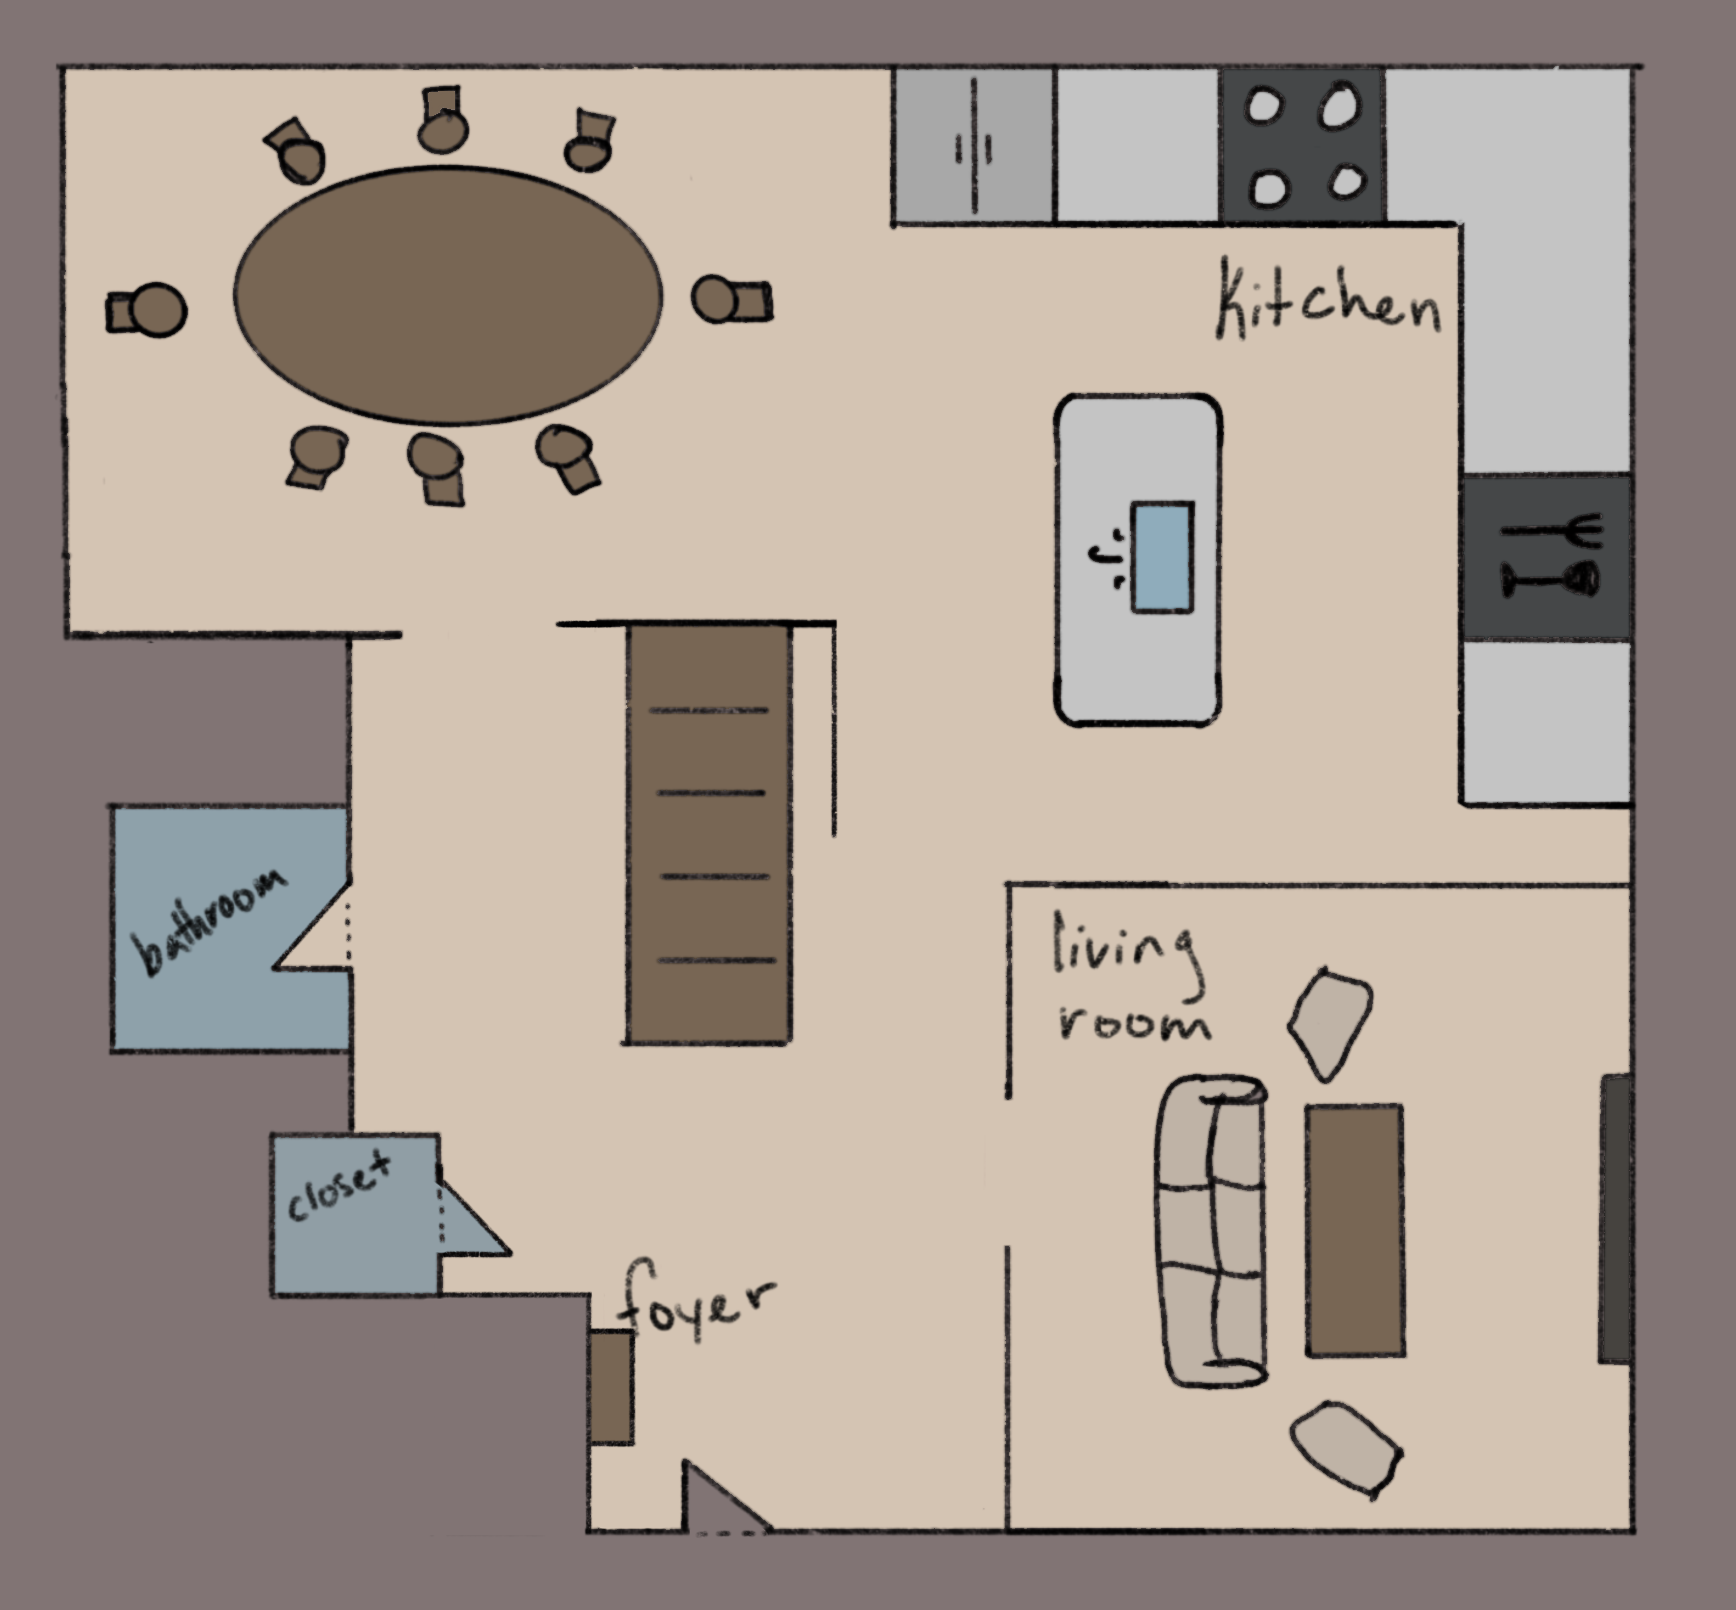 Floor plan layout of a living room on bottom right side, open kitchen and dining room on left and top. A small bathroom and closet are both shown on the left side. The design is a mix of neutral colored tans, brown, and grays.